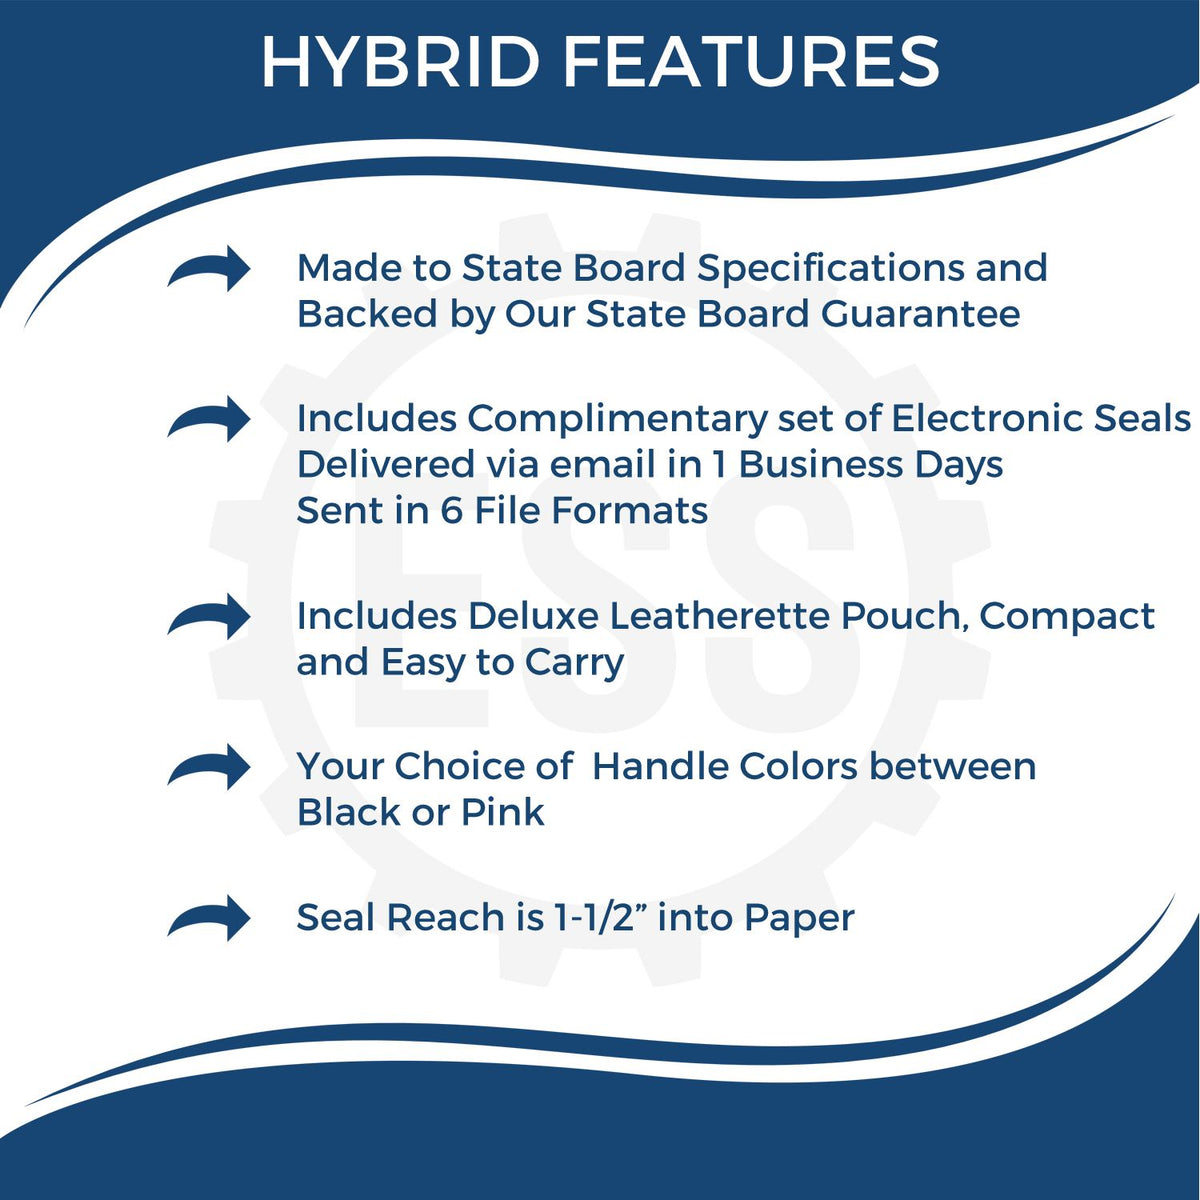 A picture of an infographic highlighting the selling points for the Hybrid New Jersey Architect Seal